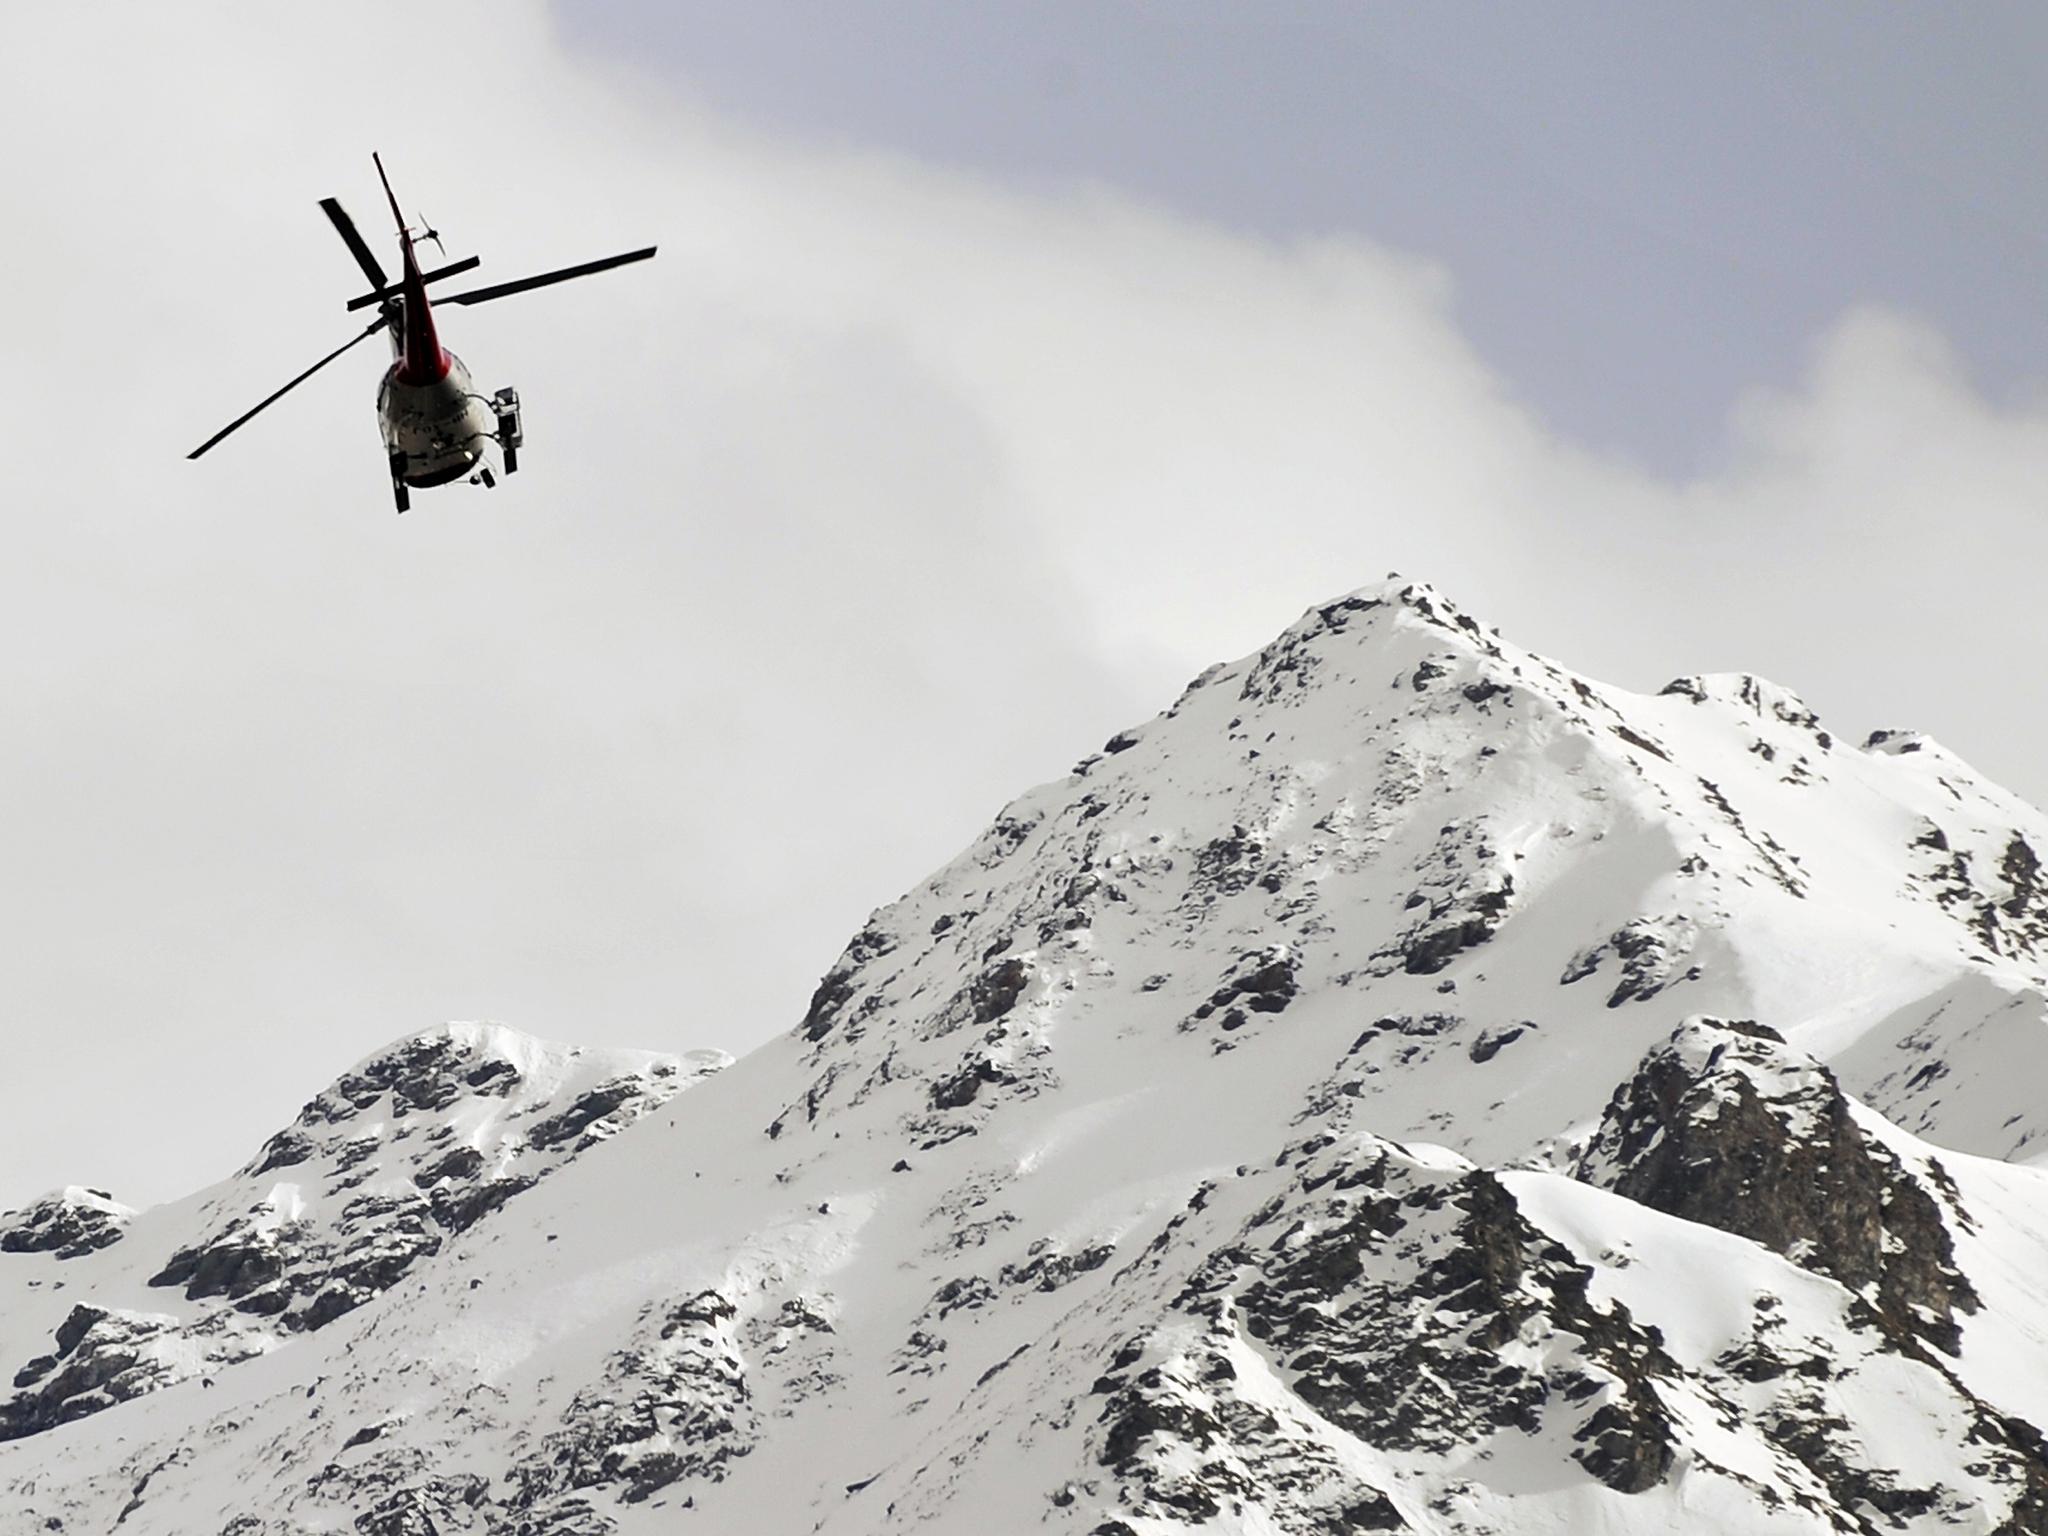 A helicopter flying over the Swiss Alps (File photo)